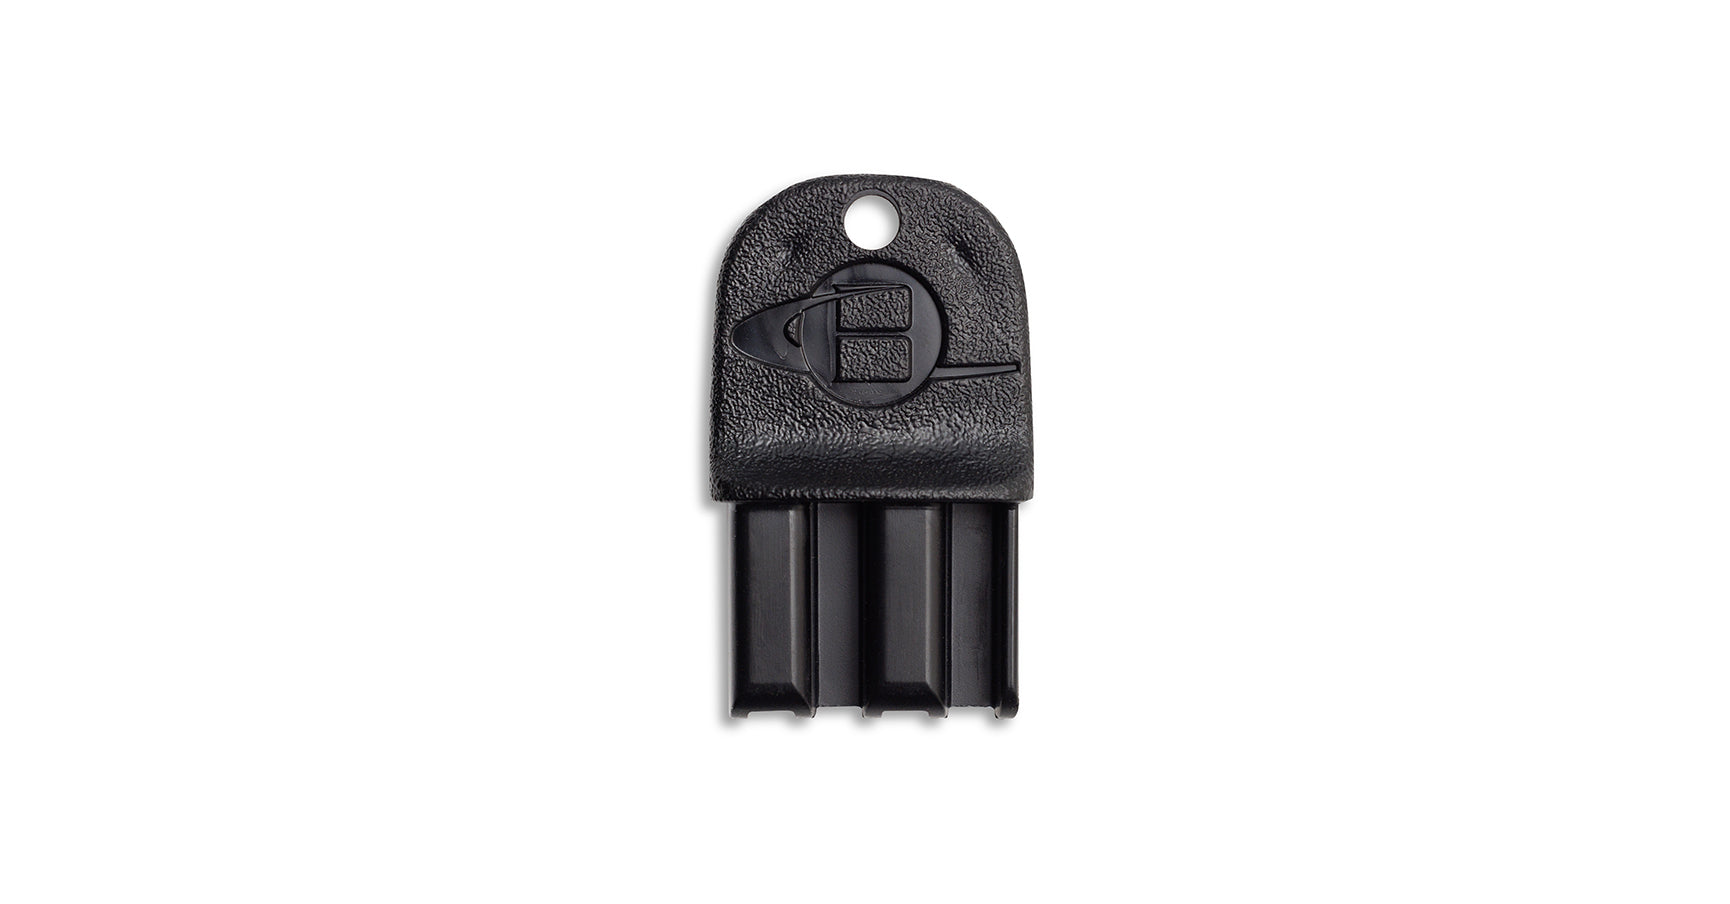 Replacement Key For Rodent Cafe Bait Station Solutions Pest, 52% OFF